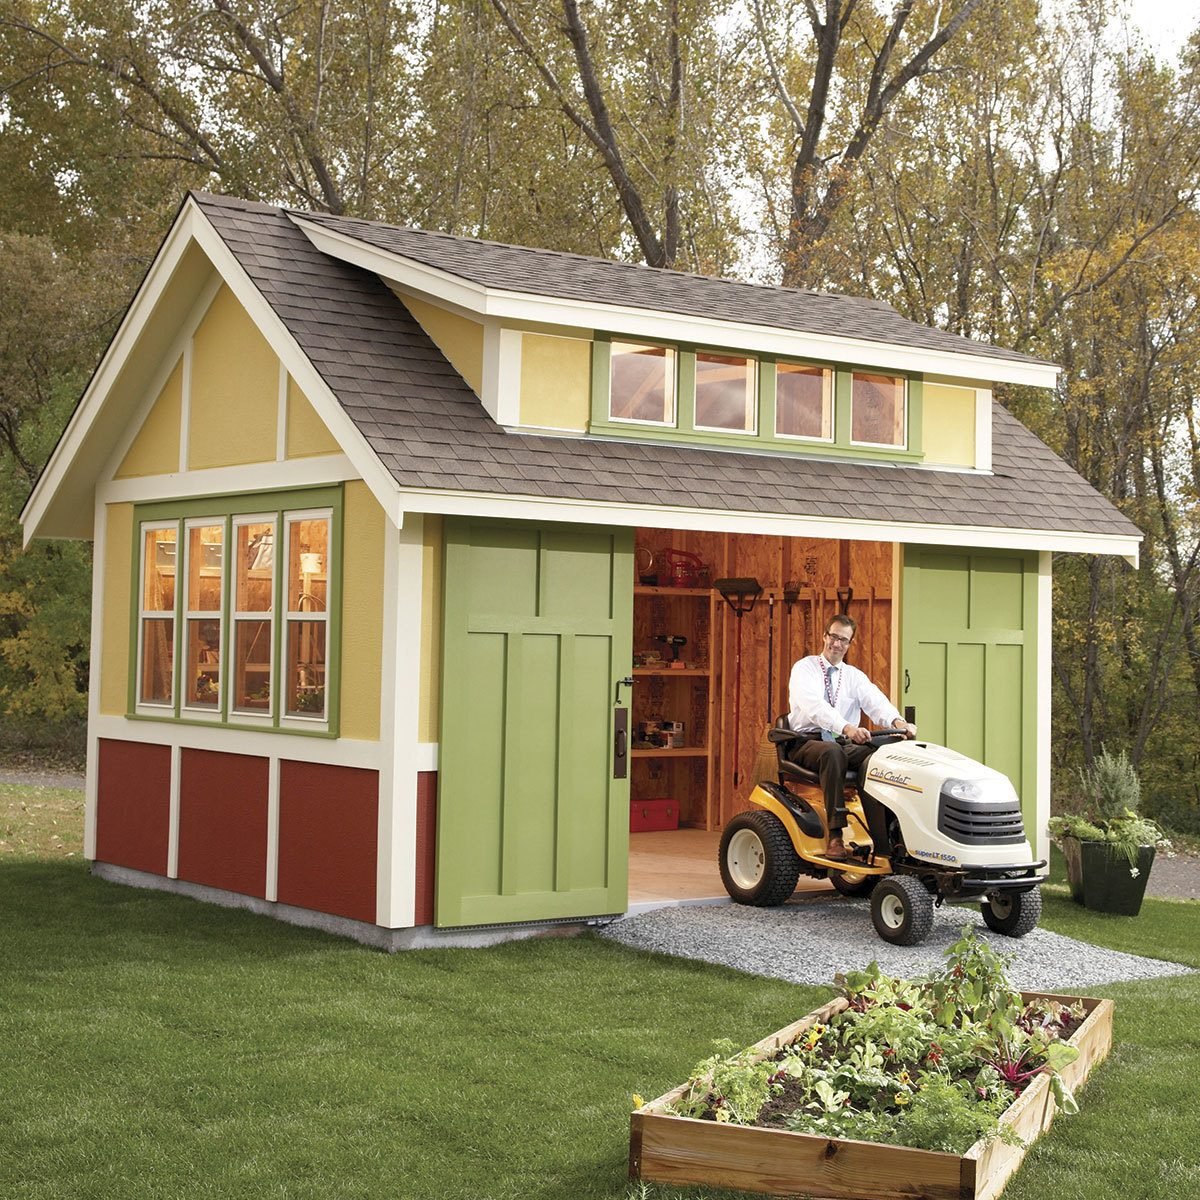  garden shed designs yourself